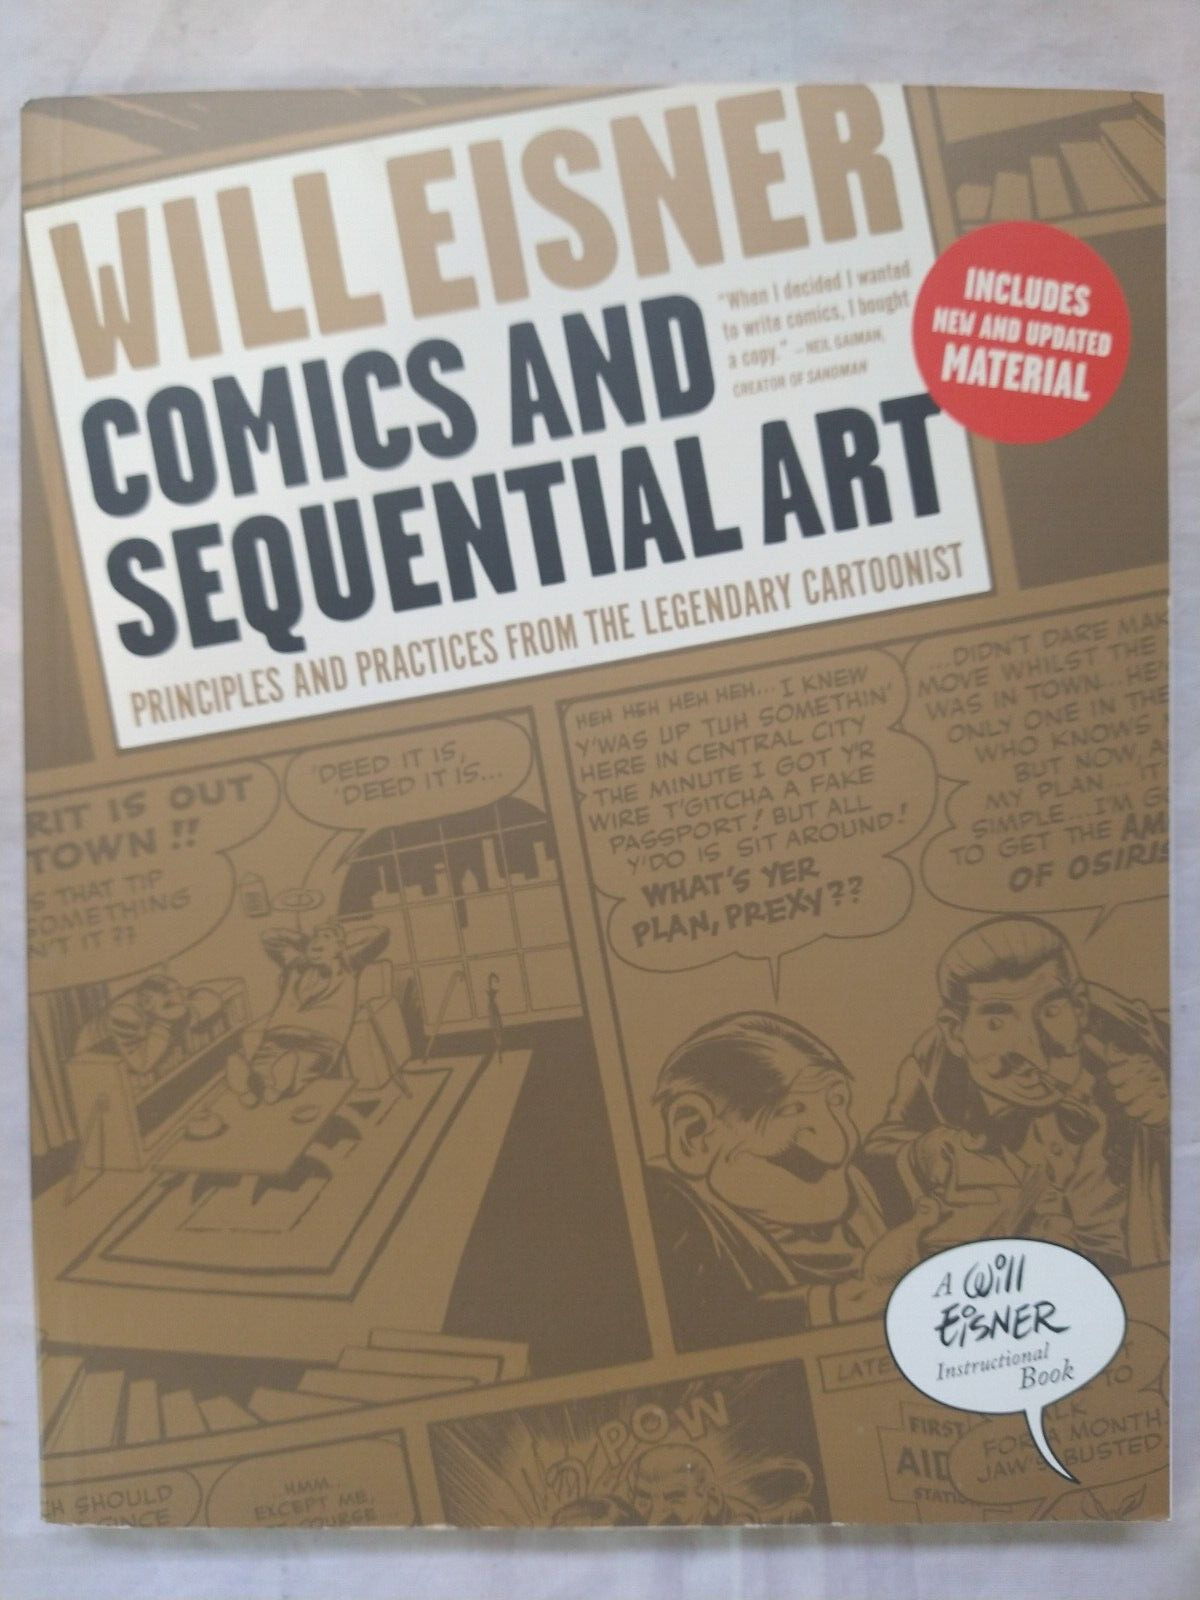 Comics and Sequential Art Paperback Will Eisner